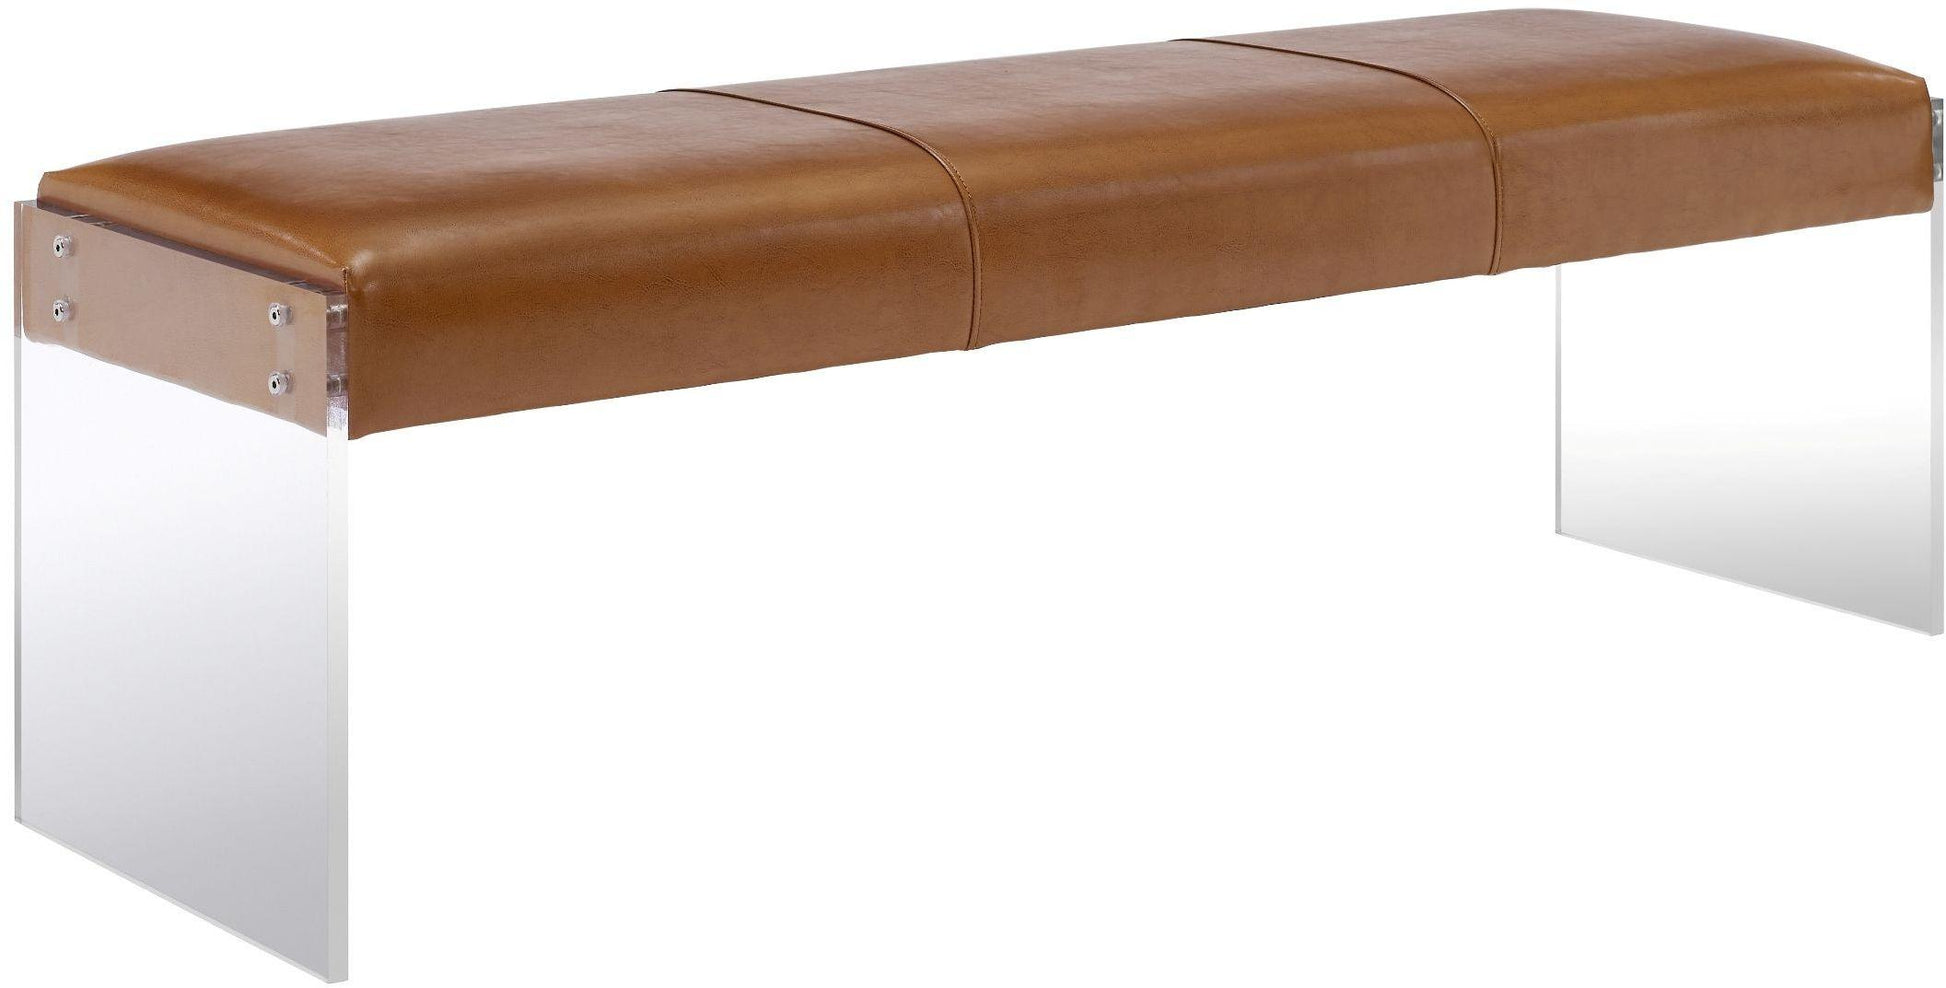 Tov Furniture Envy Brown Leather/Acrylic Bench